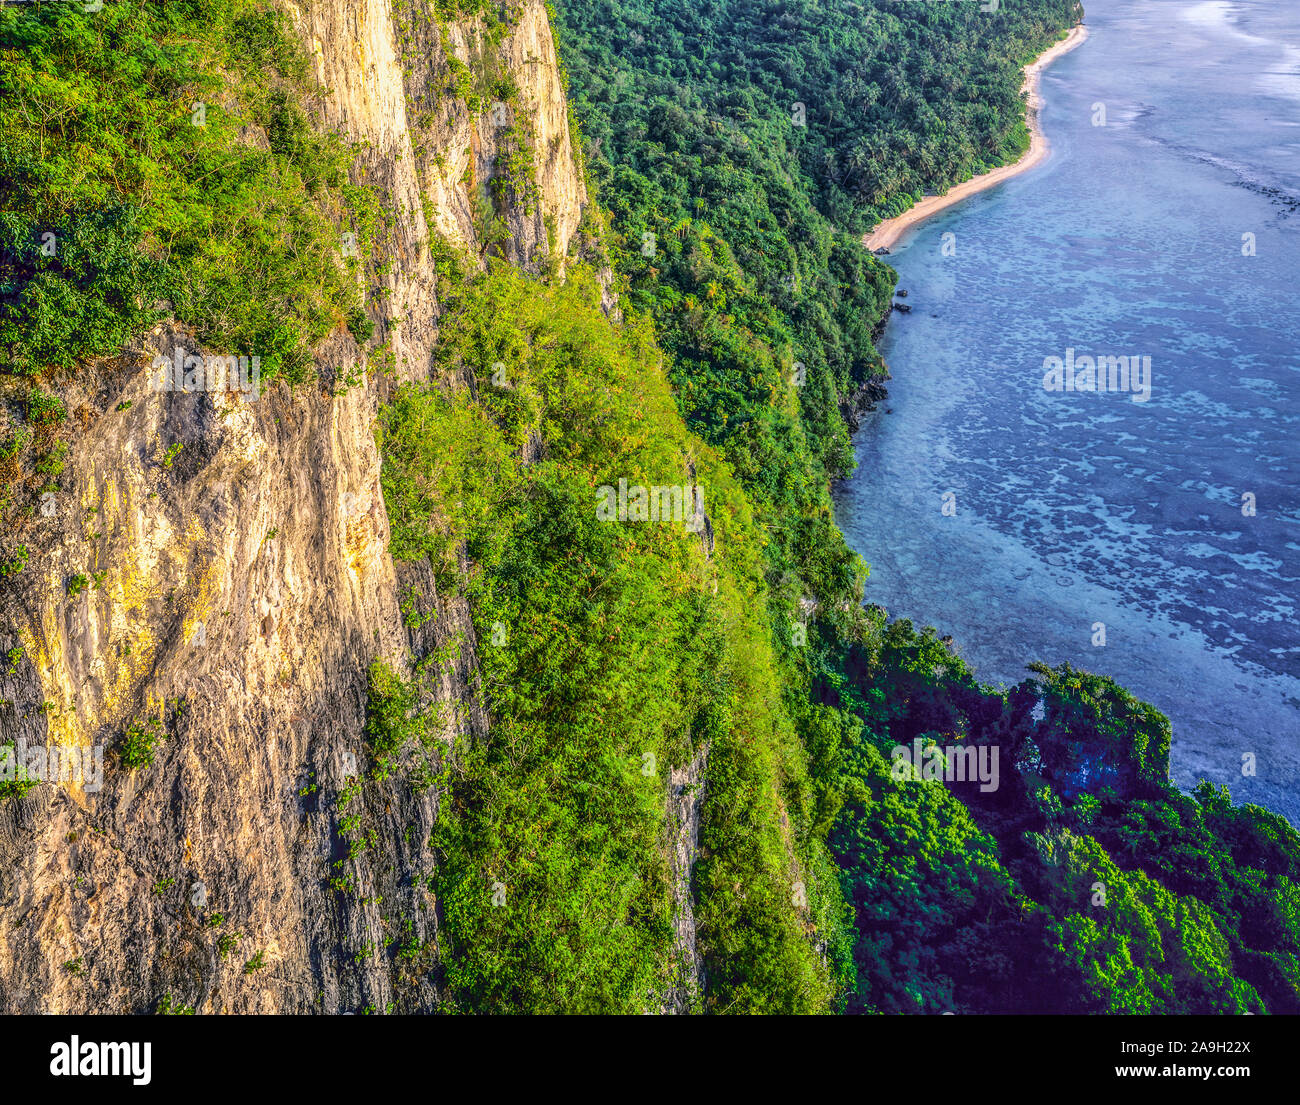 LImestone cliffs at Two Lovers Point, U.S. Territory of Guam, Pacific Ocean, Phillipine Sea, Marianas Island Stock Photo